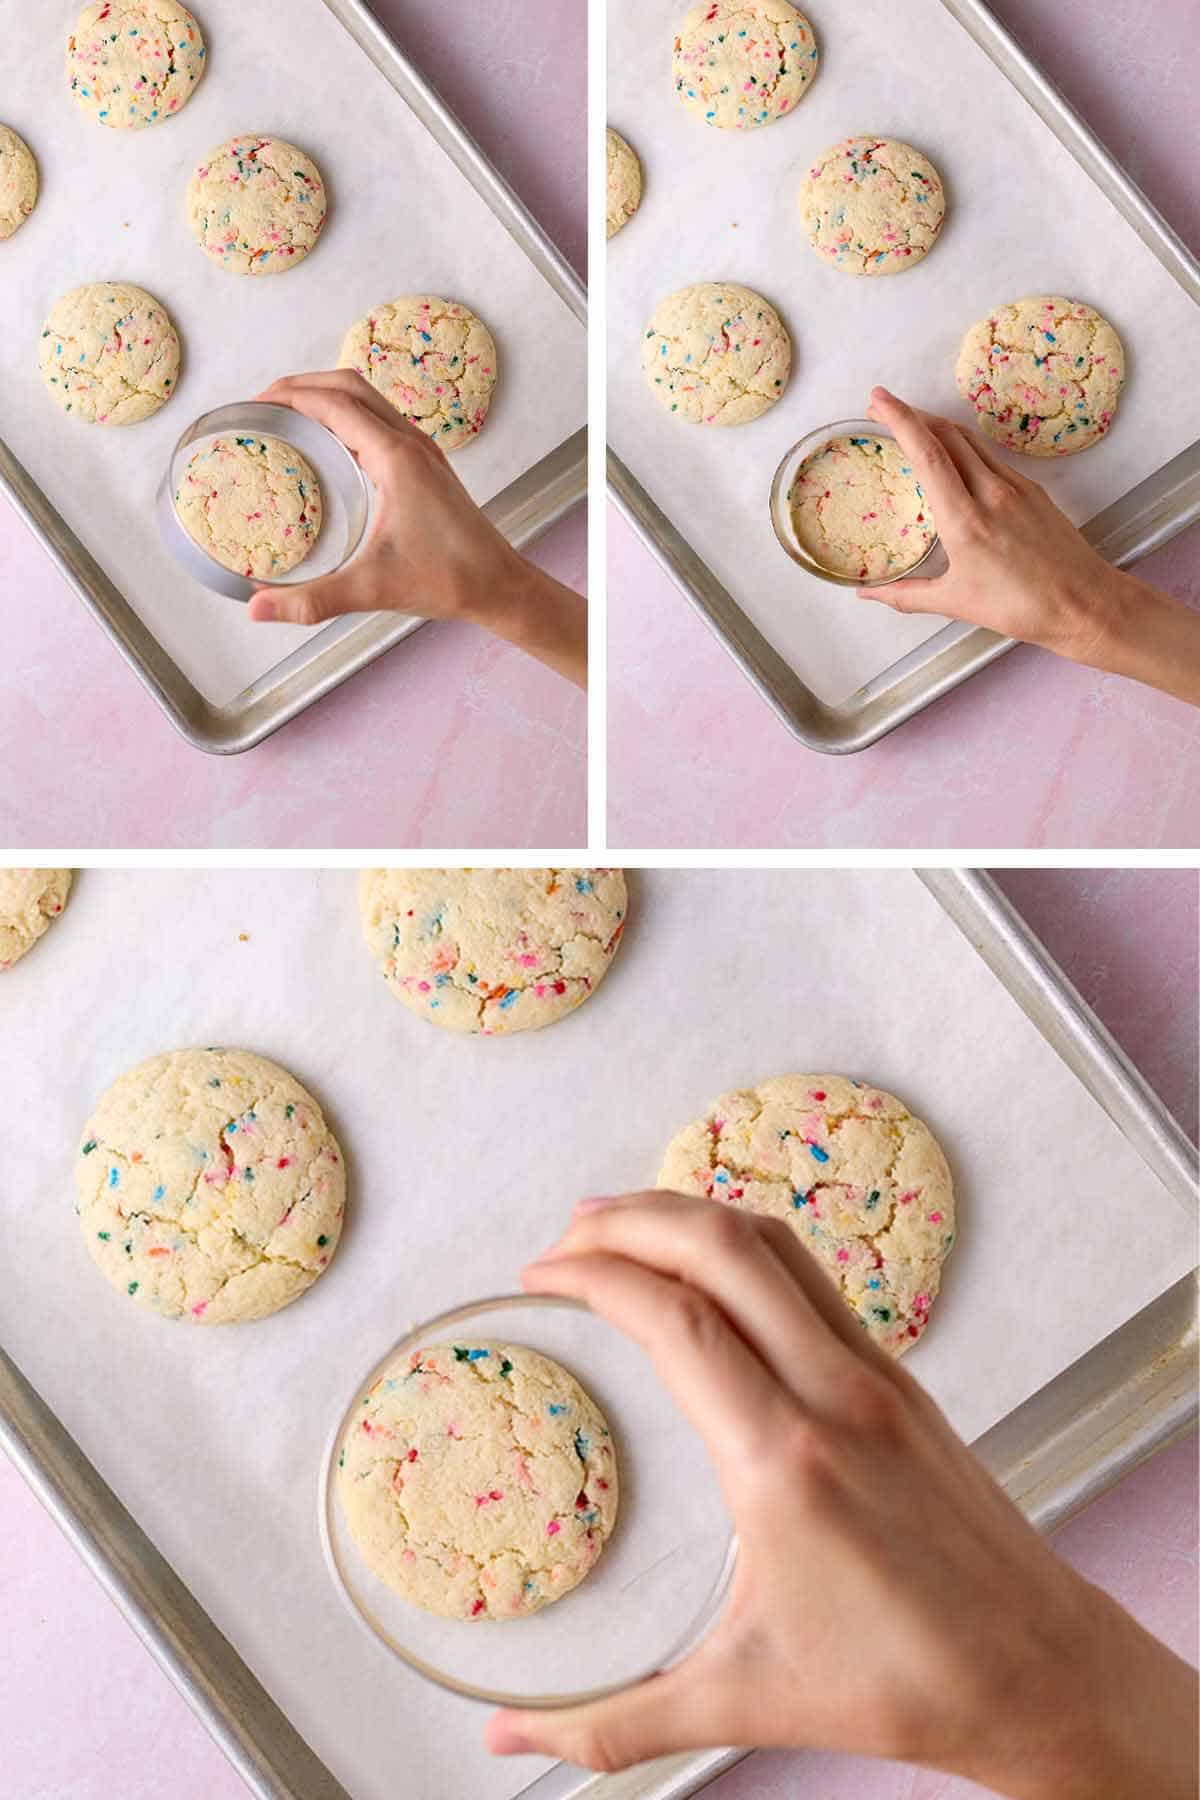 Step-by-step shots of using a cooking ring to shape the warm cookies into perfect rounds.